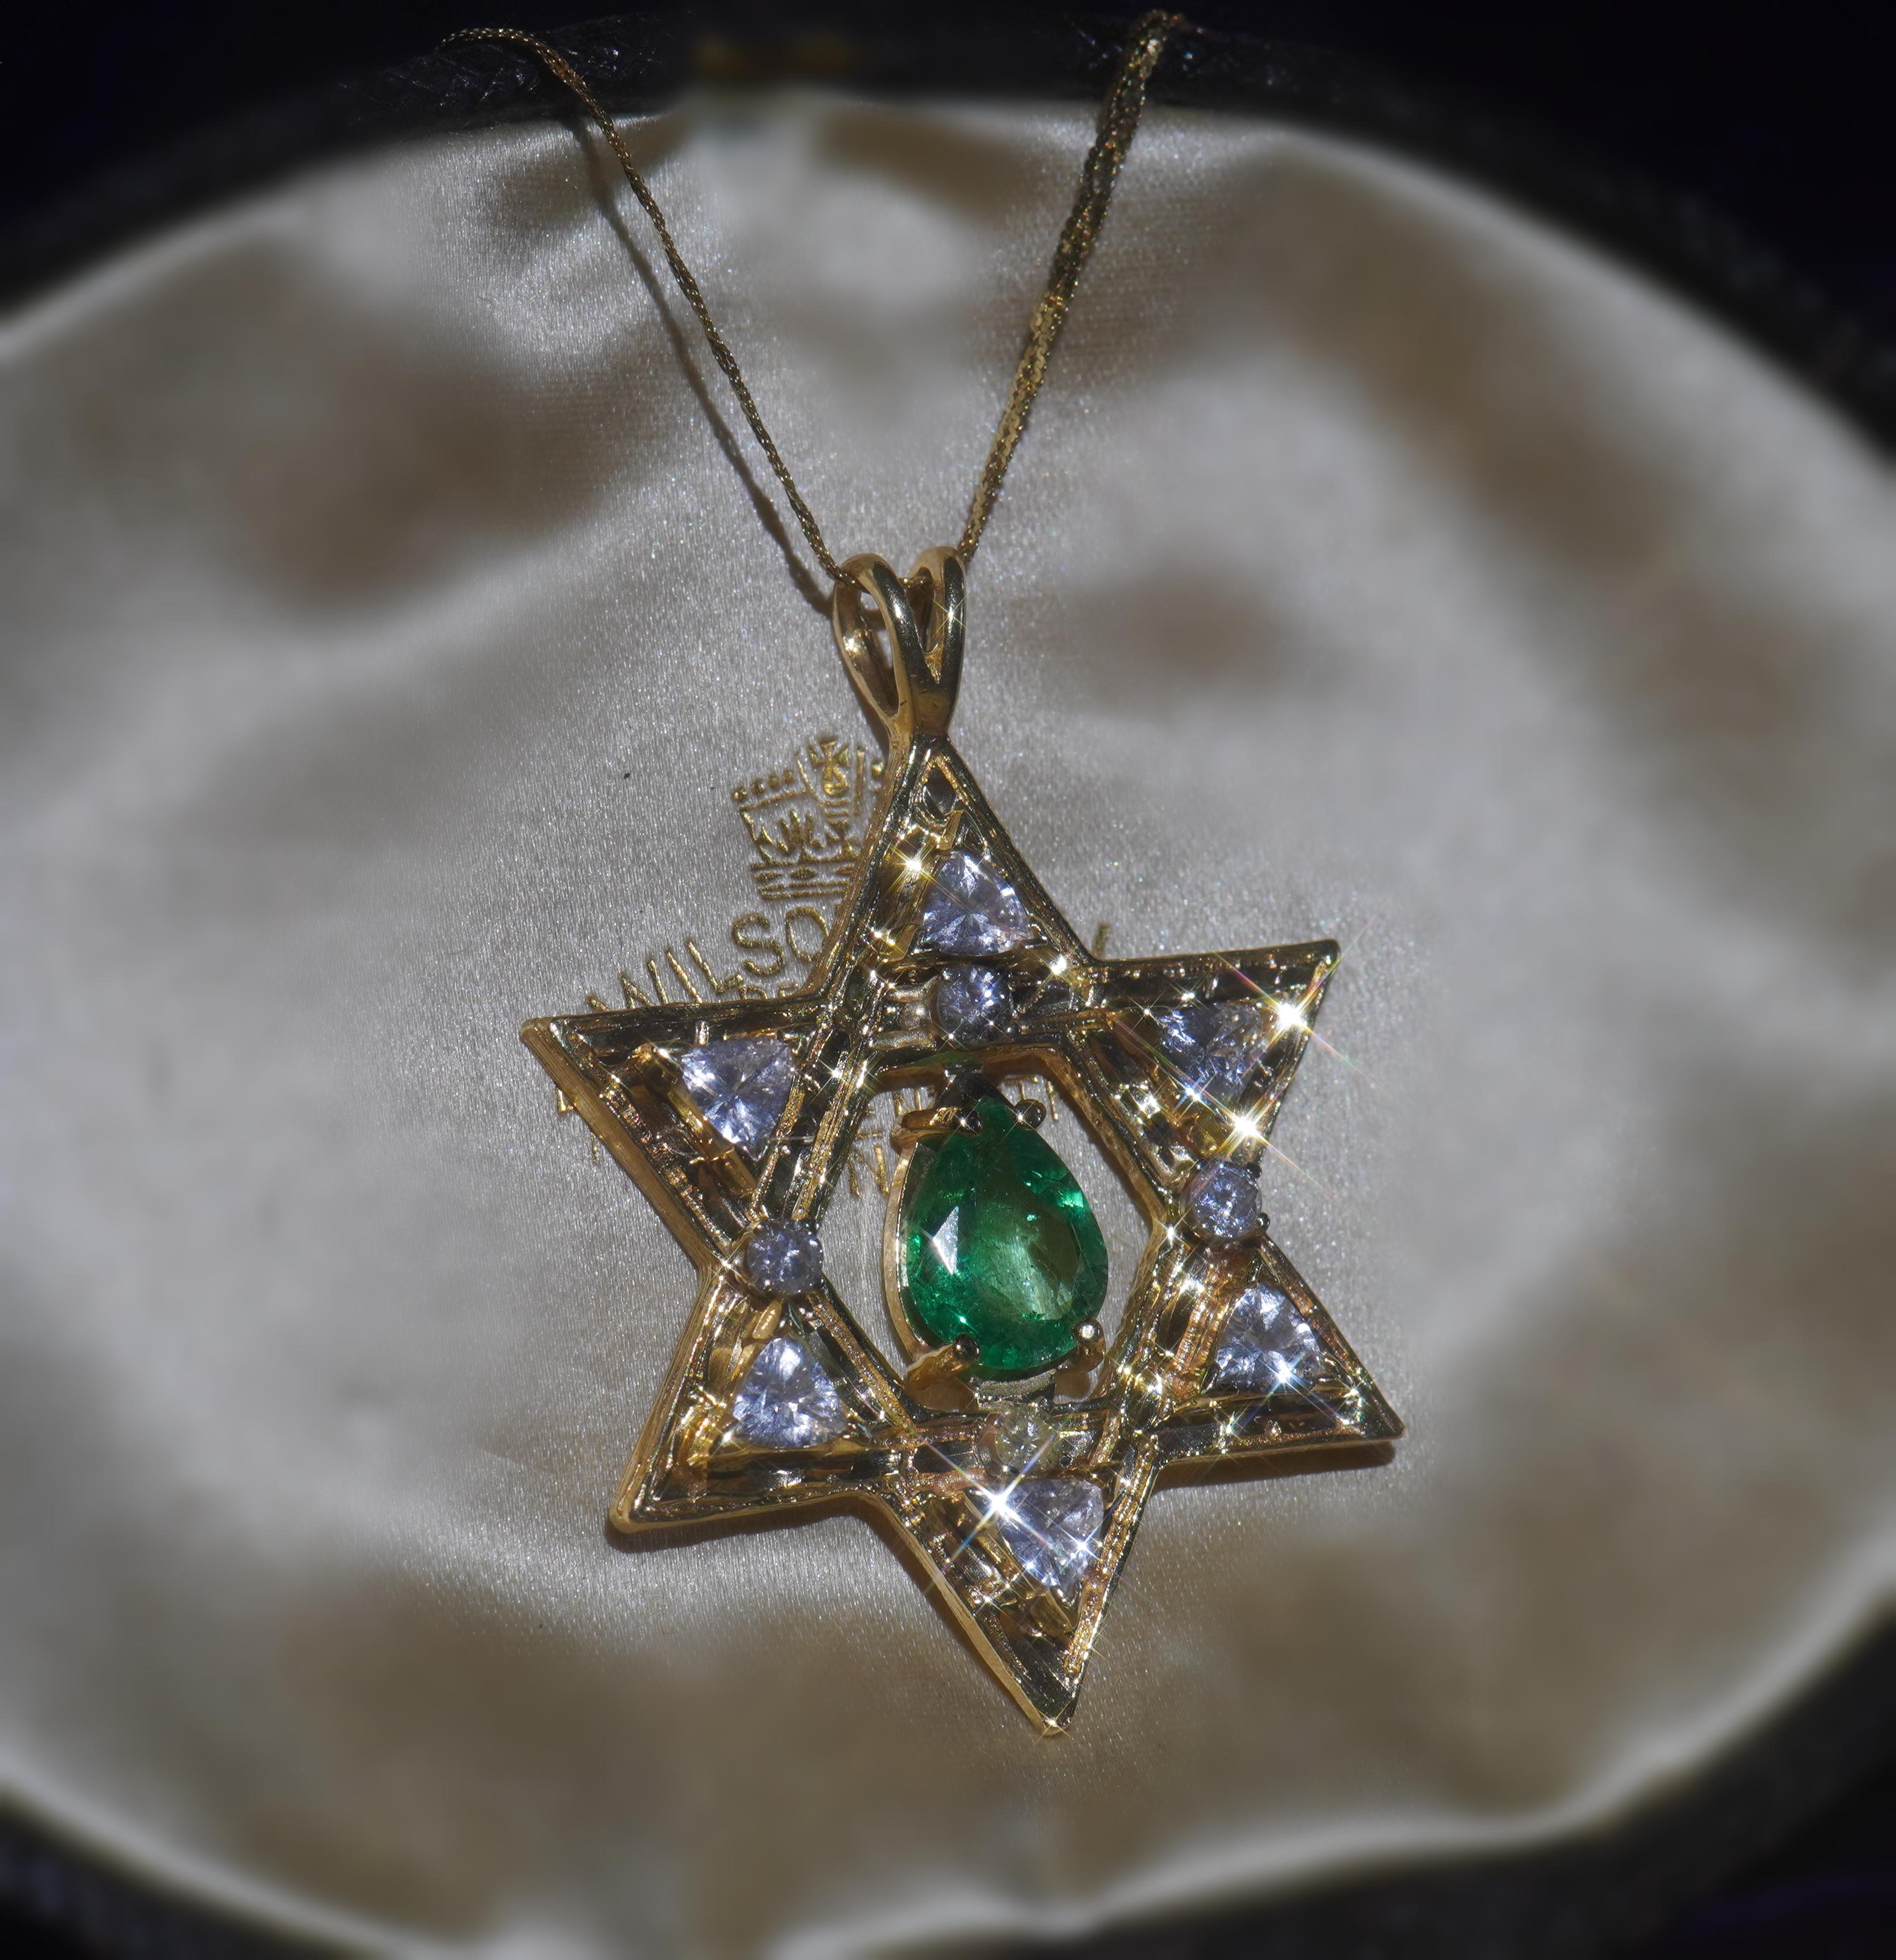 Old South Jewels proudly  presents...LUXURY.    HUGE GIA CERTIFIED 4.64 CARATS COLOMBIAN EMERALD & DIAMOND 14K STAR OF DAVID PENDANT, CHAIN & BOX!    RARE LUXURIOUS ANTIQUE COVERED IN FINEST BRILLIANT EMERALDS AND DIAMONDS.  NATURAL PEAR CUT 2.06